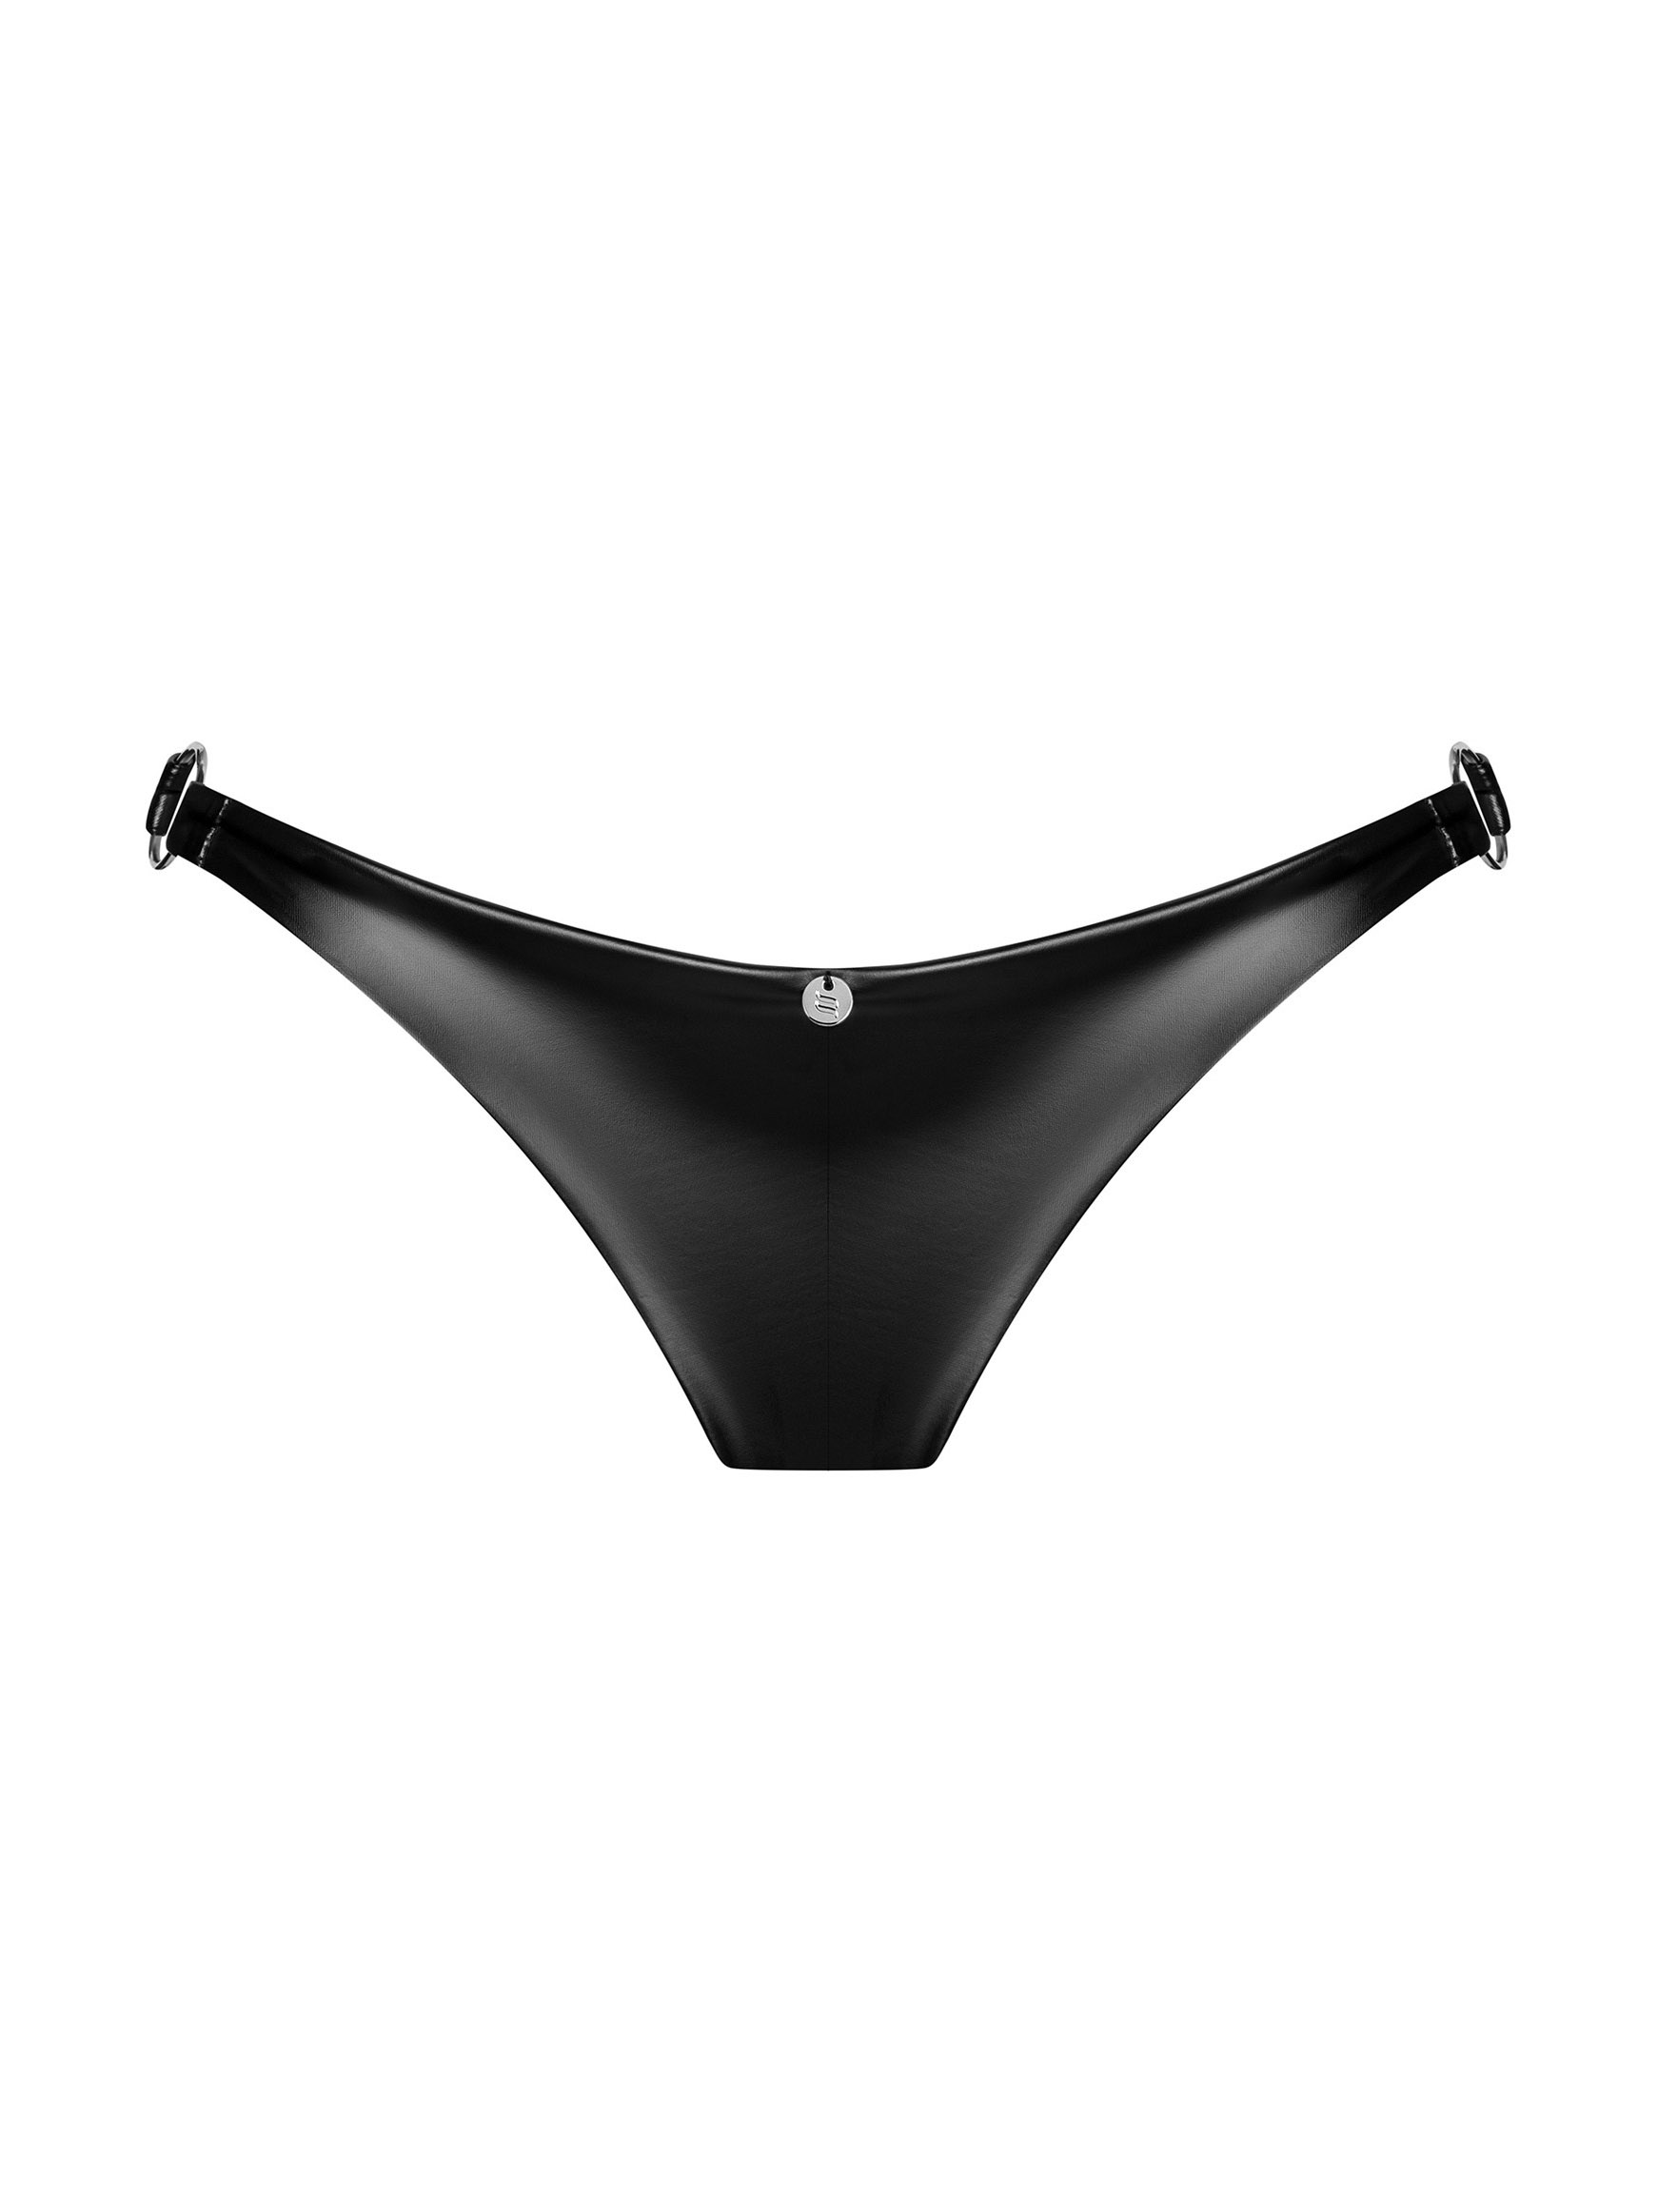 Sexy women's imitation leather panties with viscose lining Obsessive Viranes #5